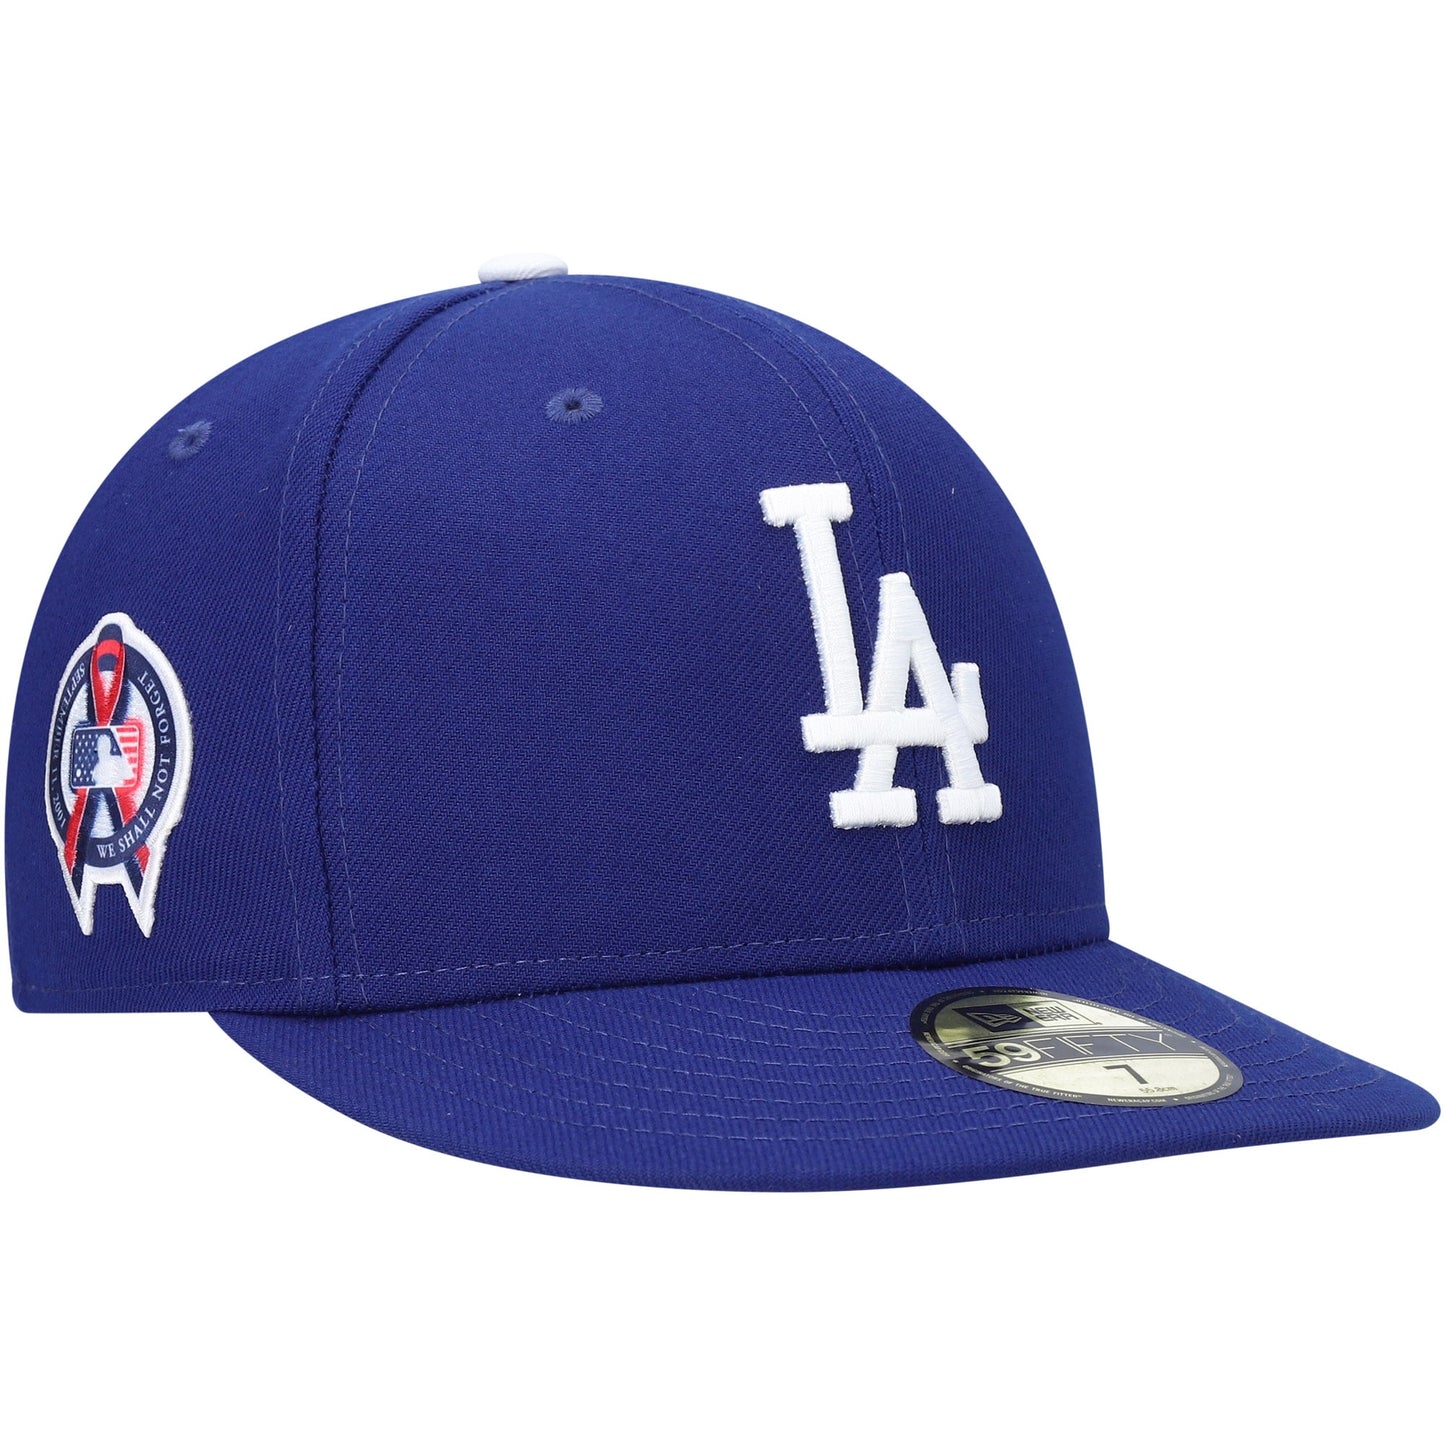 Los Angeles Dodgers New Era 9/11 Memorial Side Patch 59FIFTY Fitted Hat - Royal